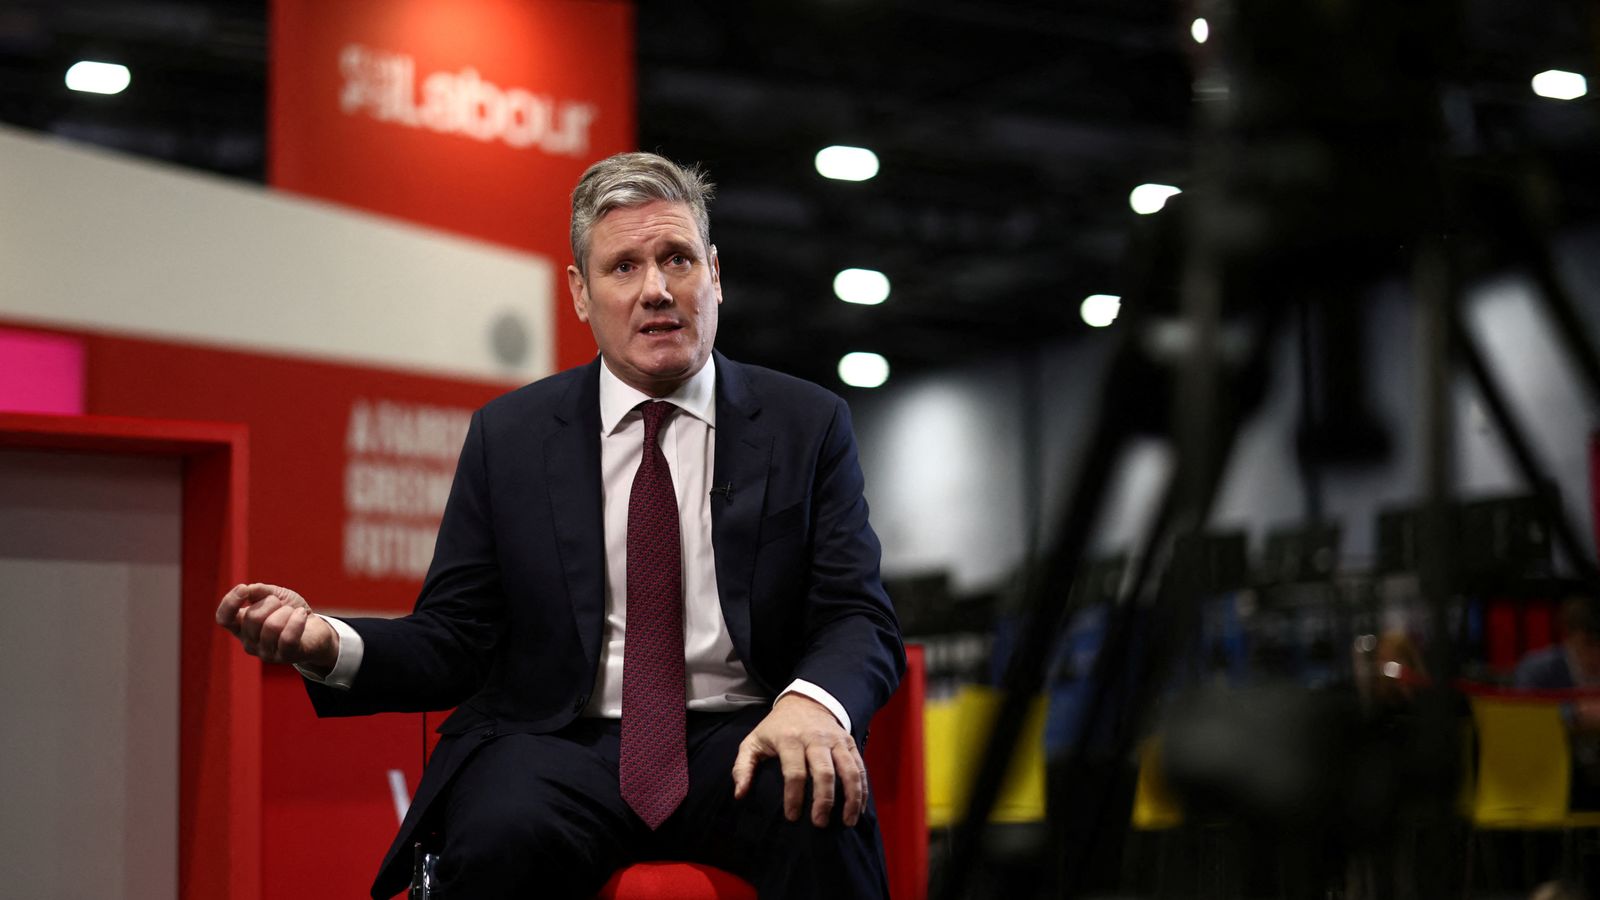 Keir Starmer sacks chief of staff as he moves Labour to an 'election footing'